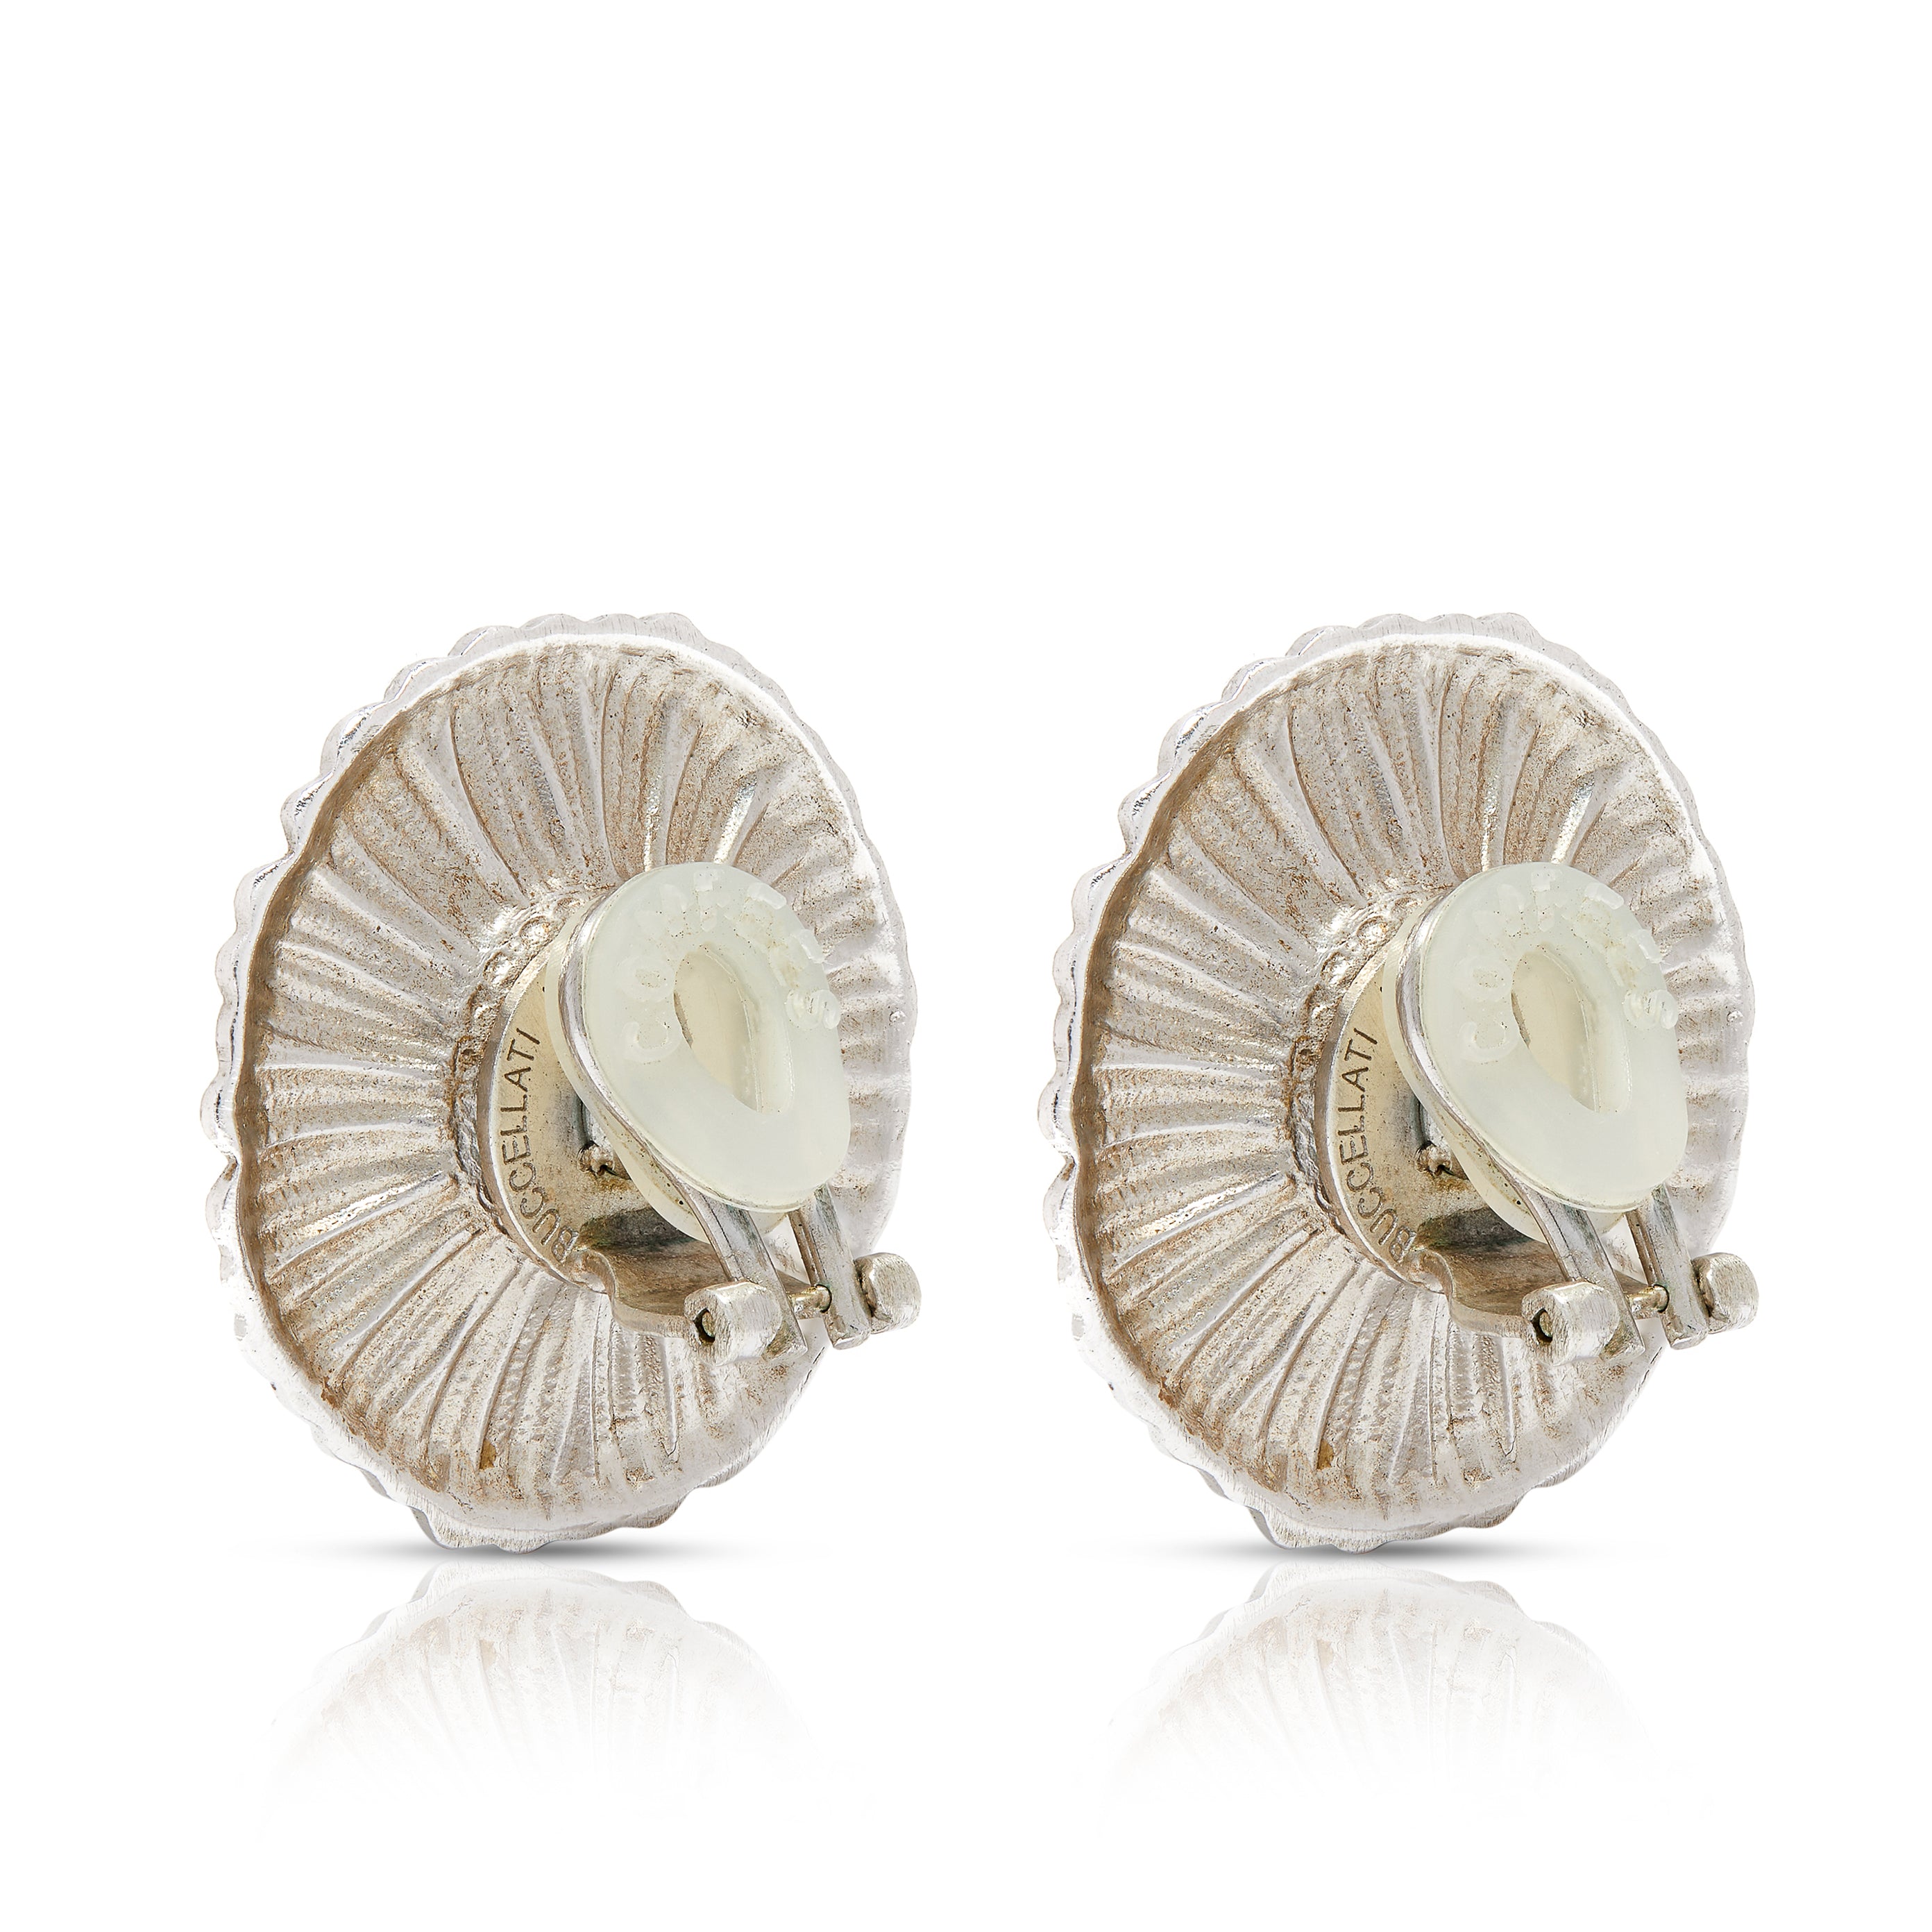 Contemporary Buccellati silver and colored brown diamonds earclips